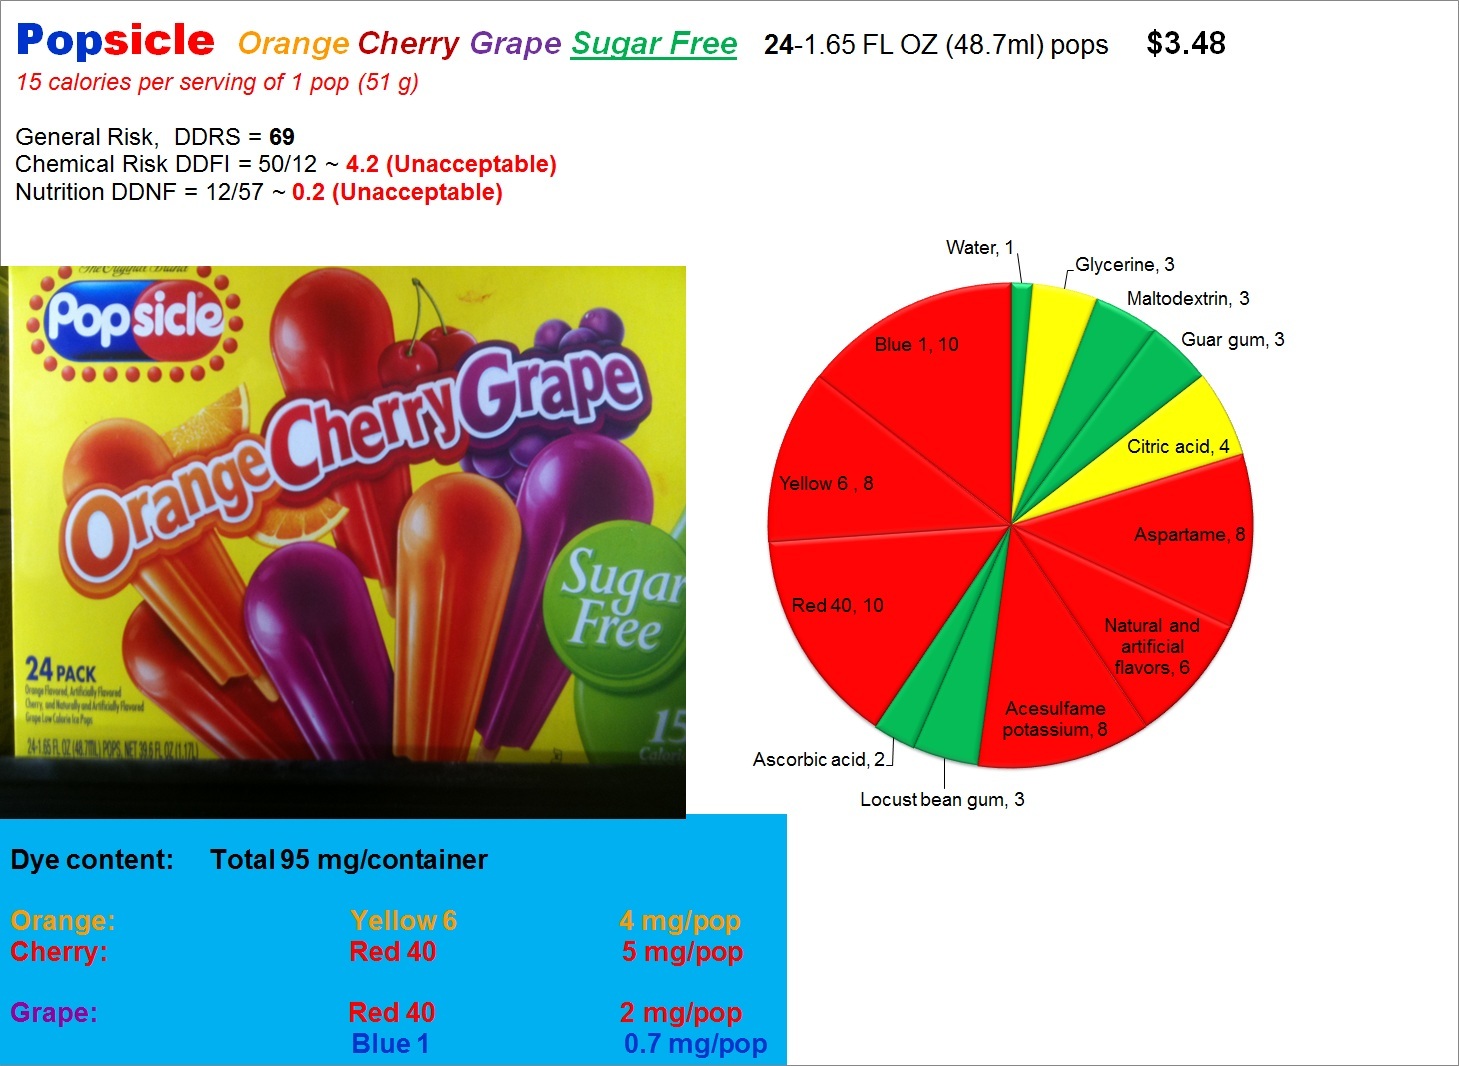 http://www.dyediet.com/wp-content/uploads/2012/05/Popsicle-Sugar-Free-Risk-Nutrition-and-Dye-Content.jpg